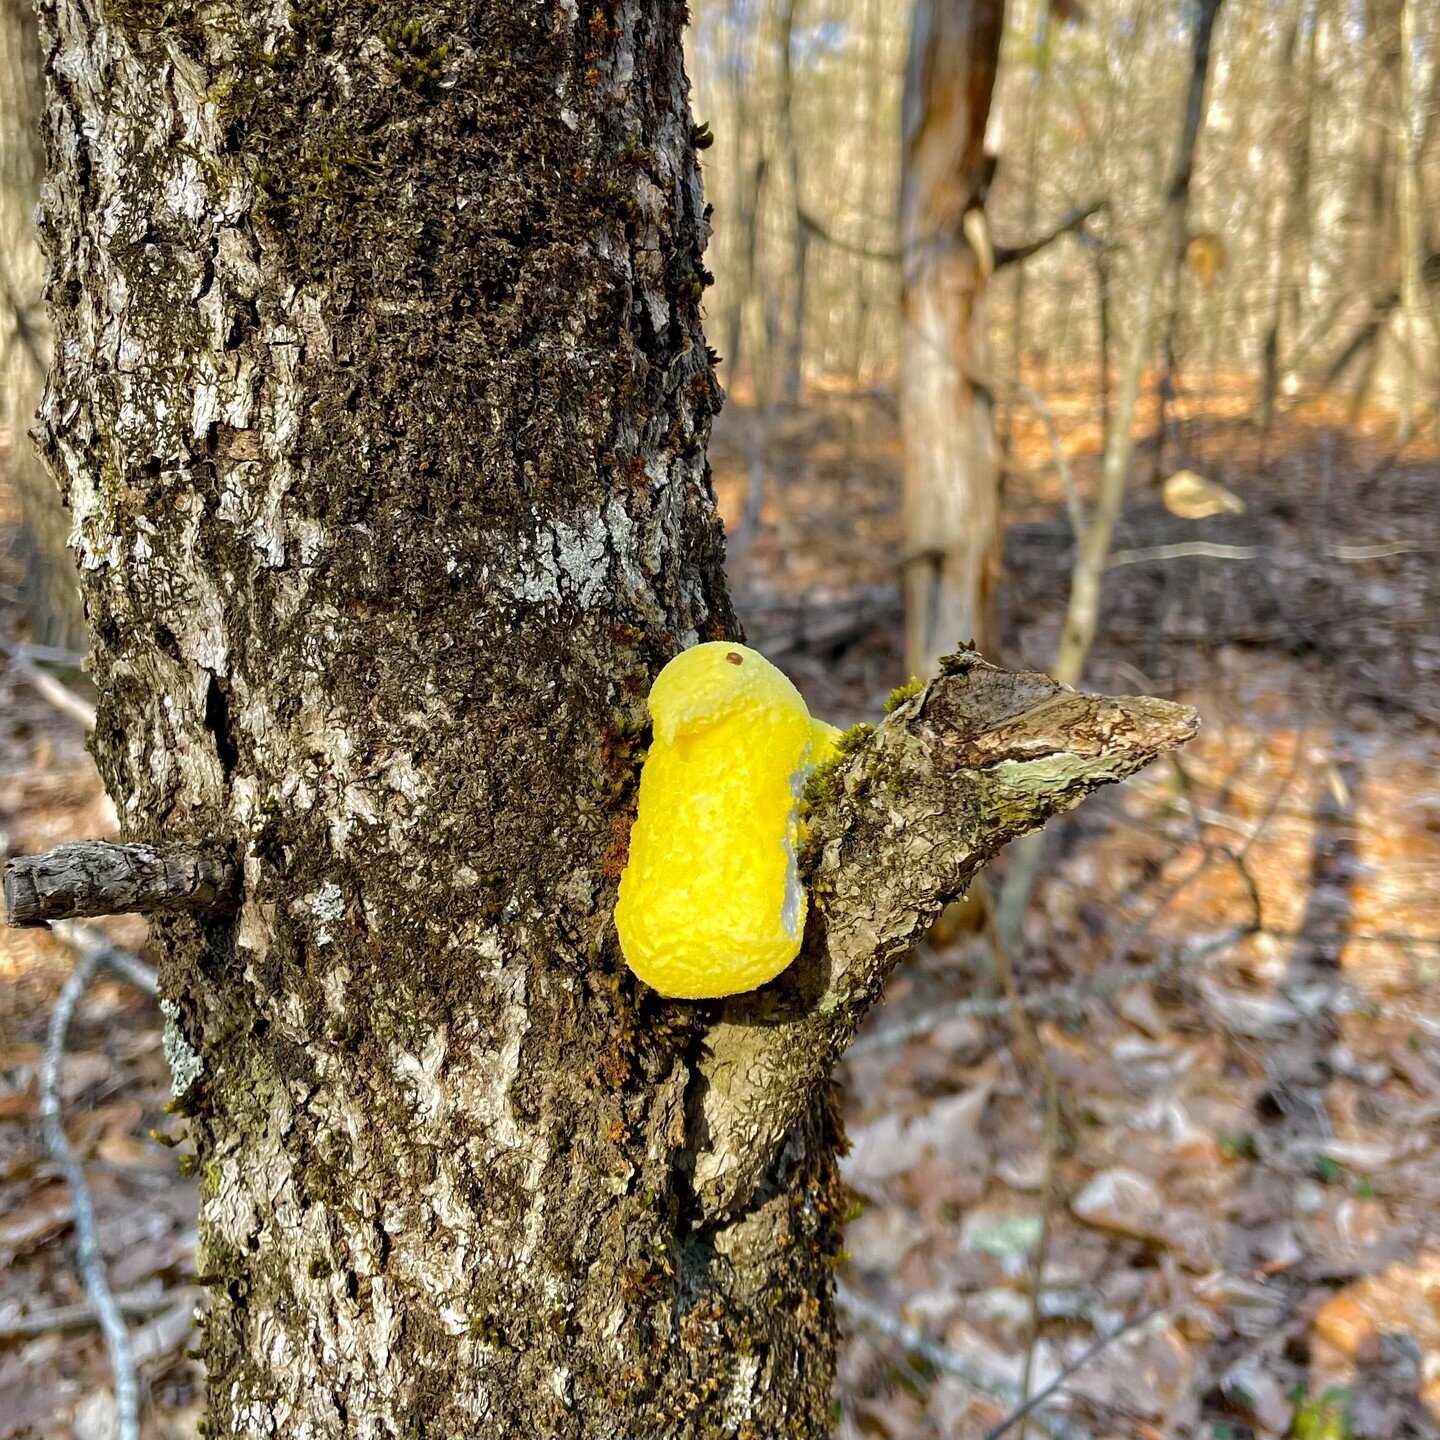 Rare bird alert! 

A species never before seen in the Falmouth woods was spotted today... a rare, &ldquo;flightless yellowpeep!&rdquo;

Check the comments to learn another name for this bird!

#falmouthmaine 

Image description: a yellow marshmallow 